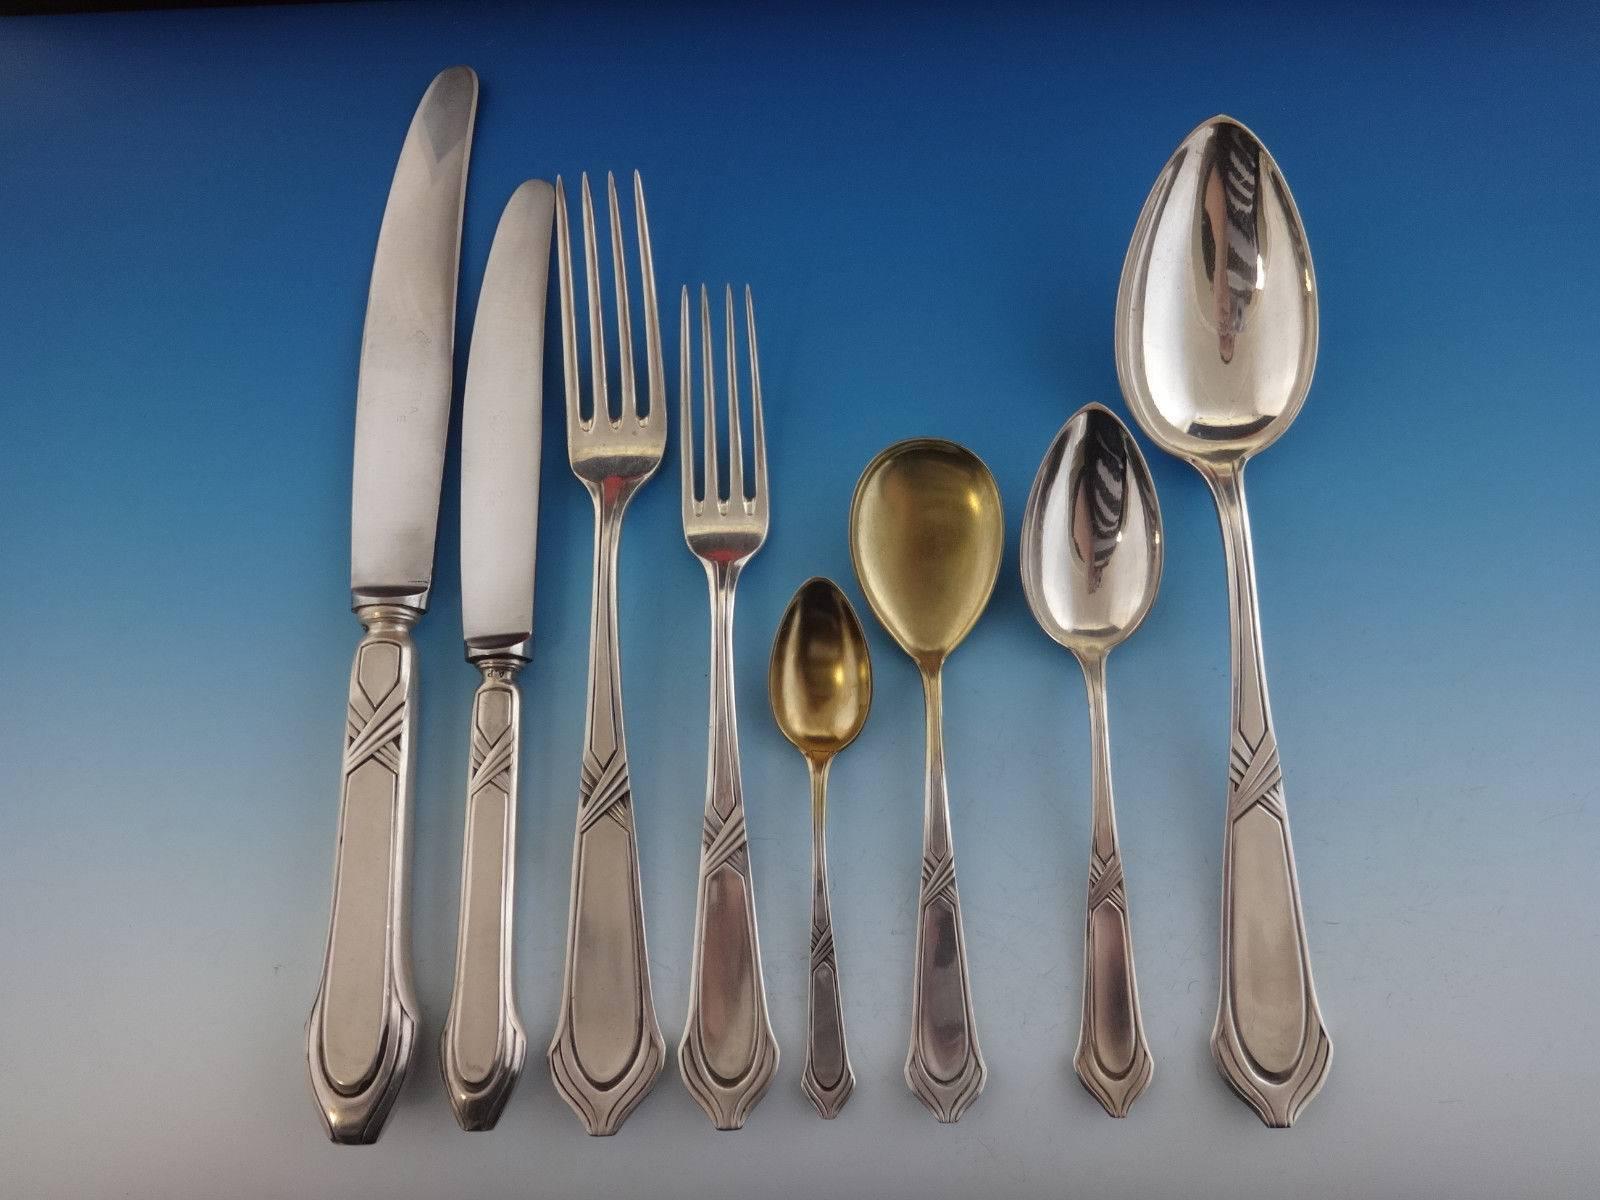 Beautiful Austrian 800 silver Alfred Pollack flatware set of massive 115 pieces. This set includes:

12 dinner knives, 10